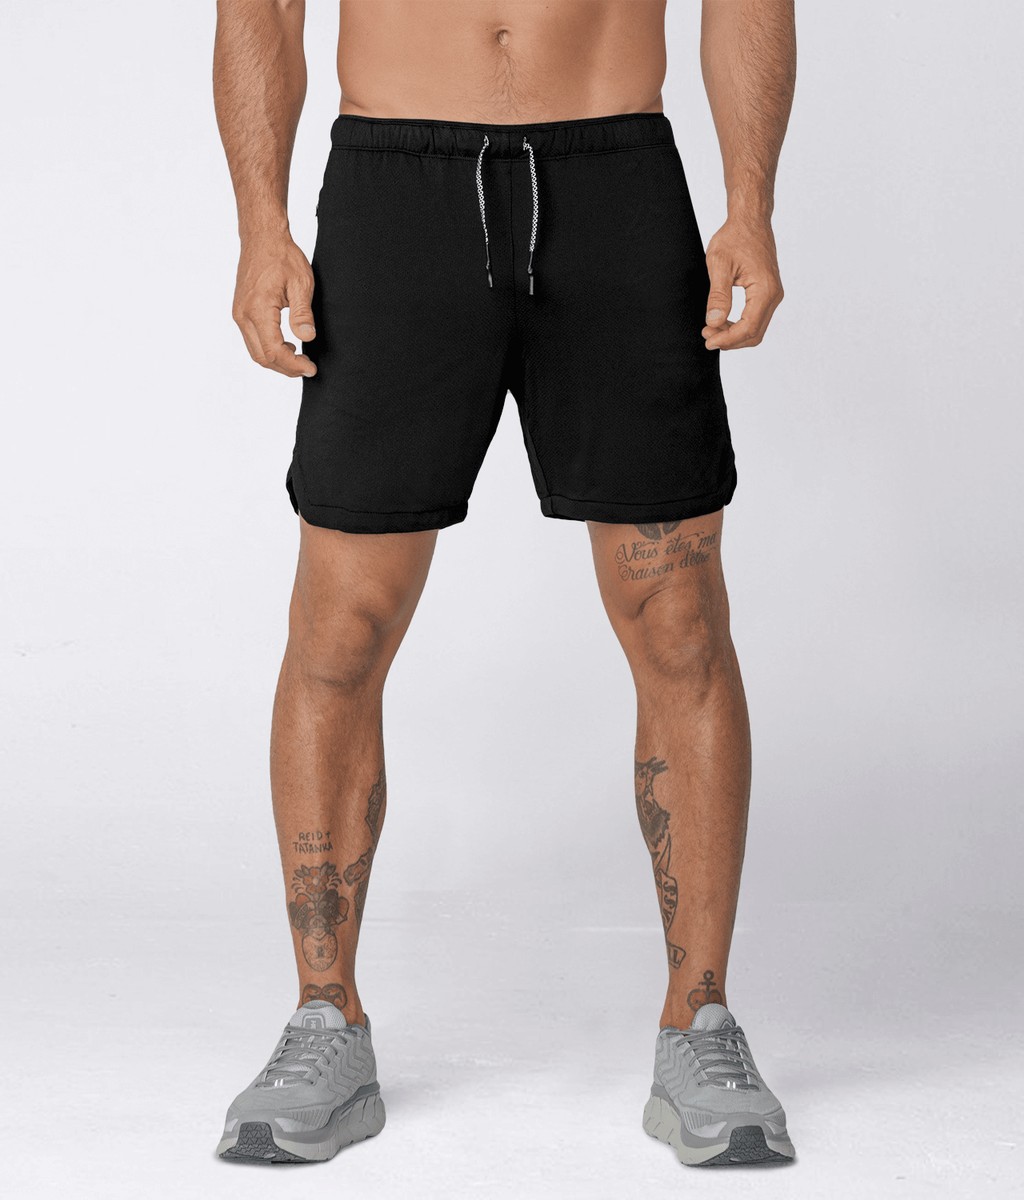 Air Pro™ 7 Ink Black 2 in 1 Men's Gym Workout Shorts with Liner